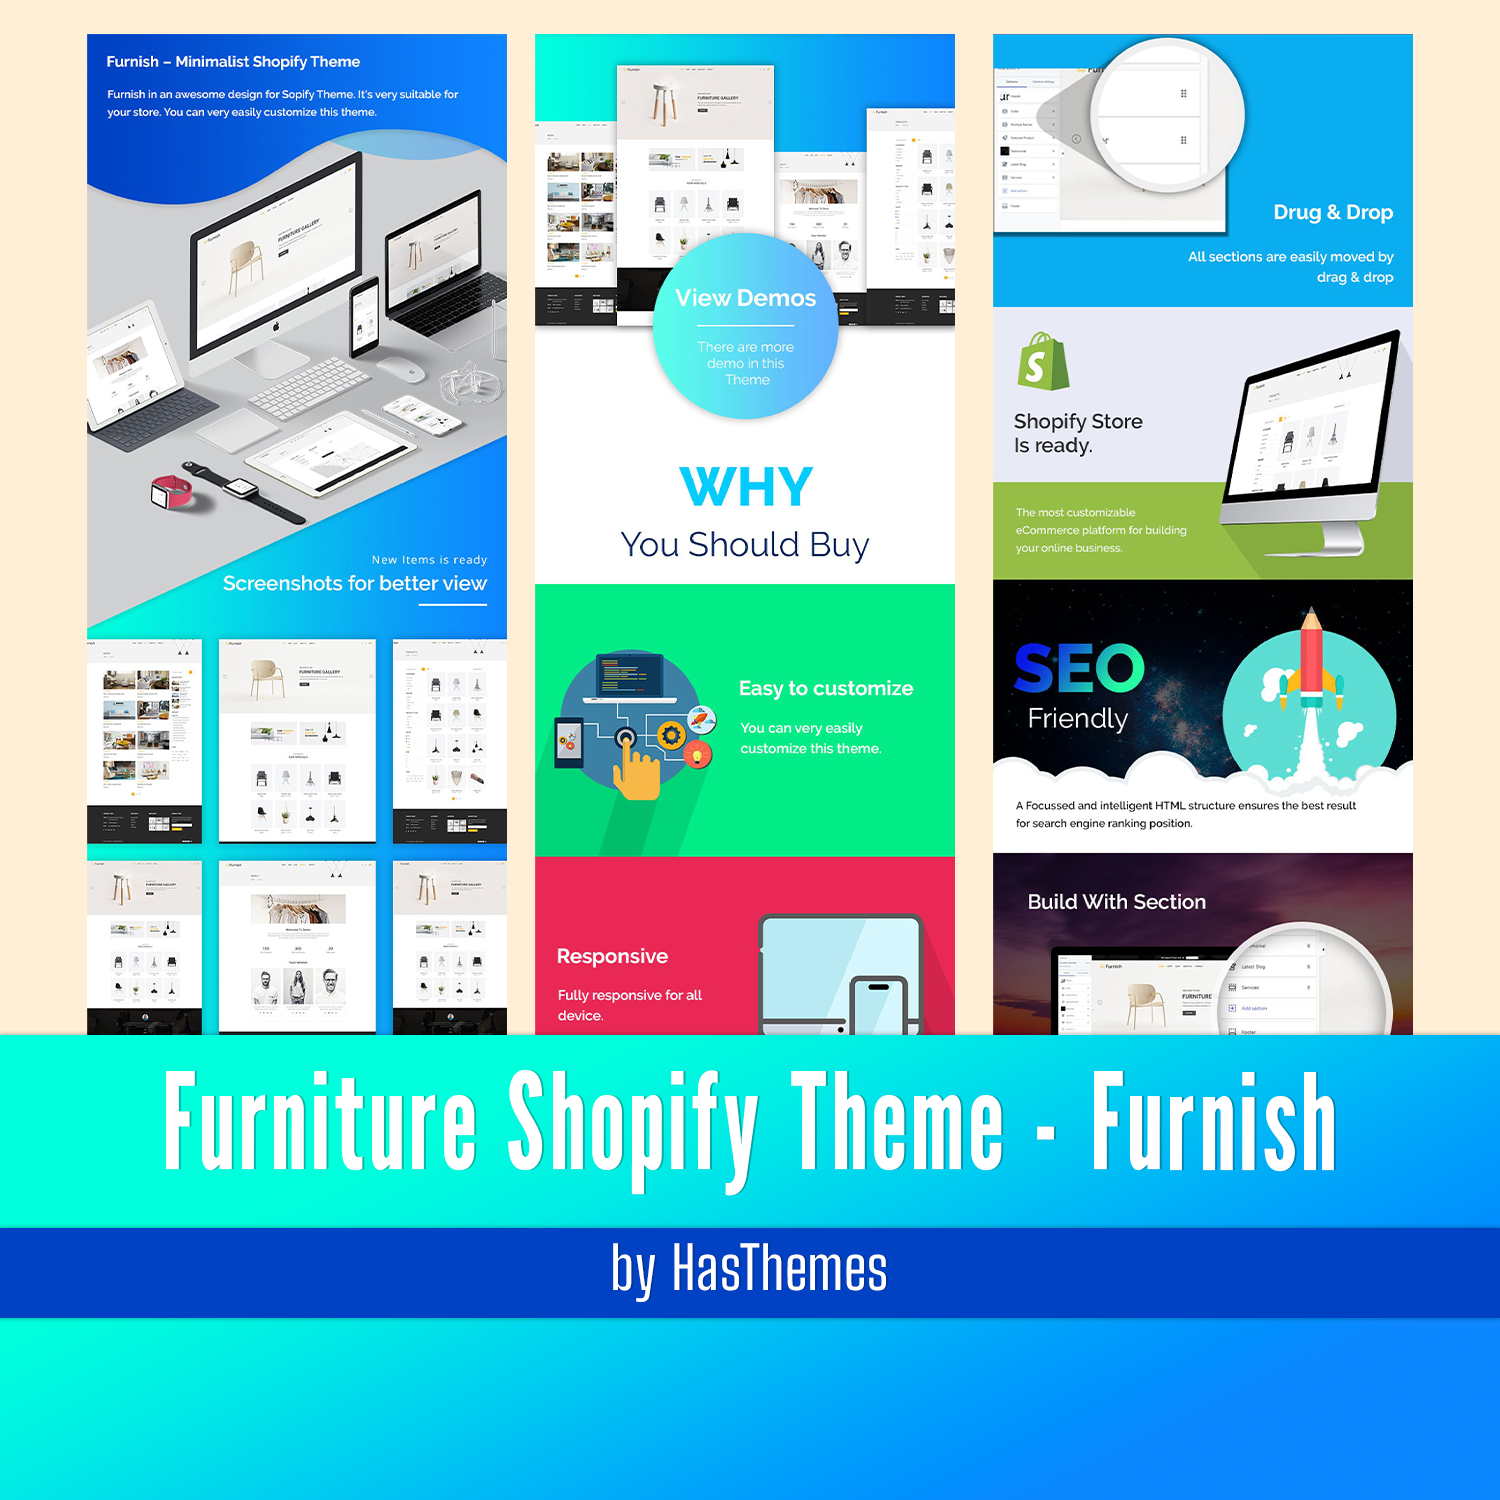 Preview furniture shopify theme furnish.